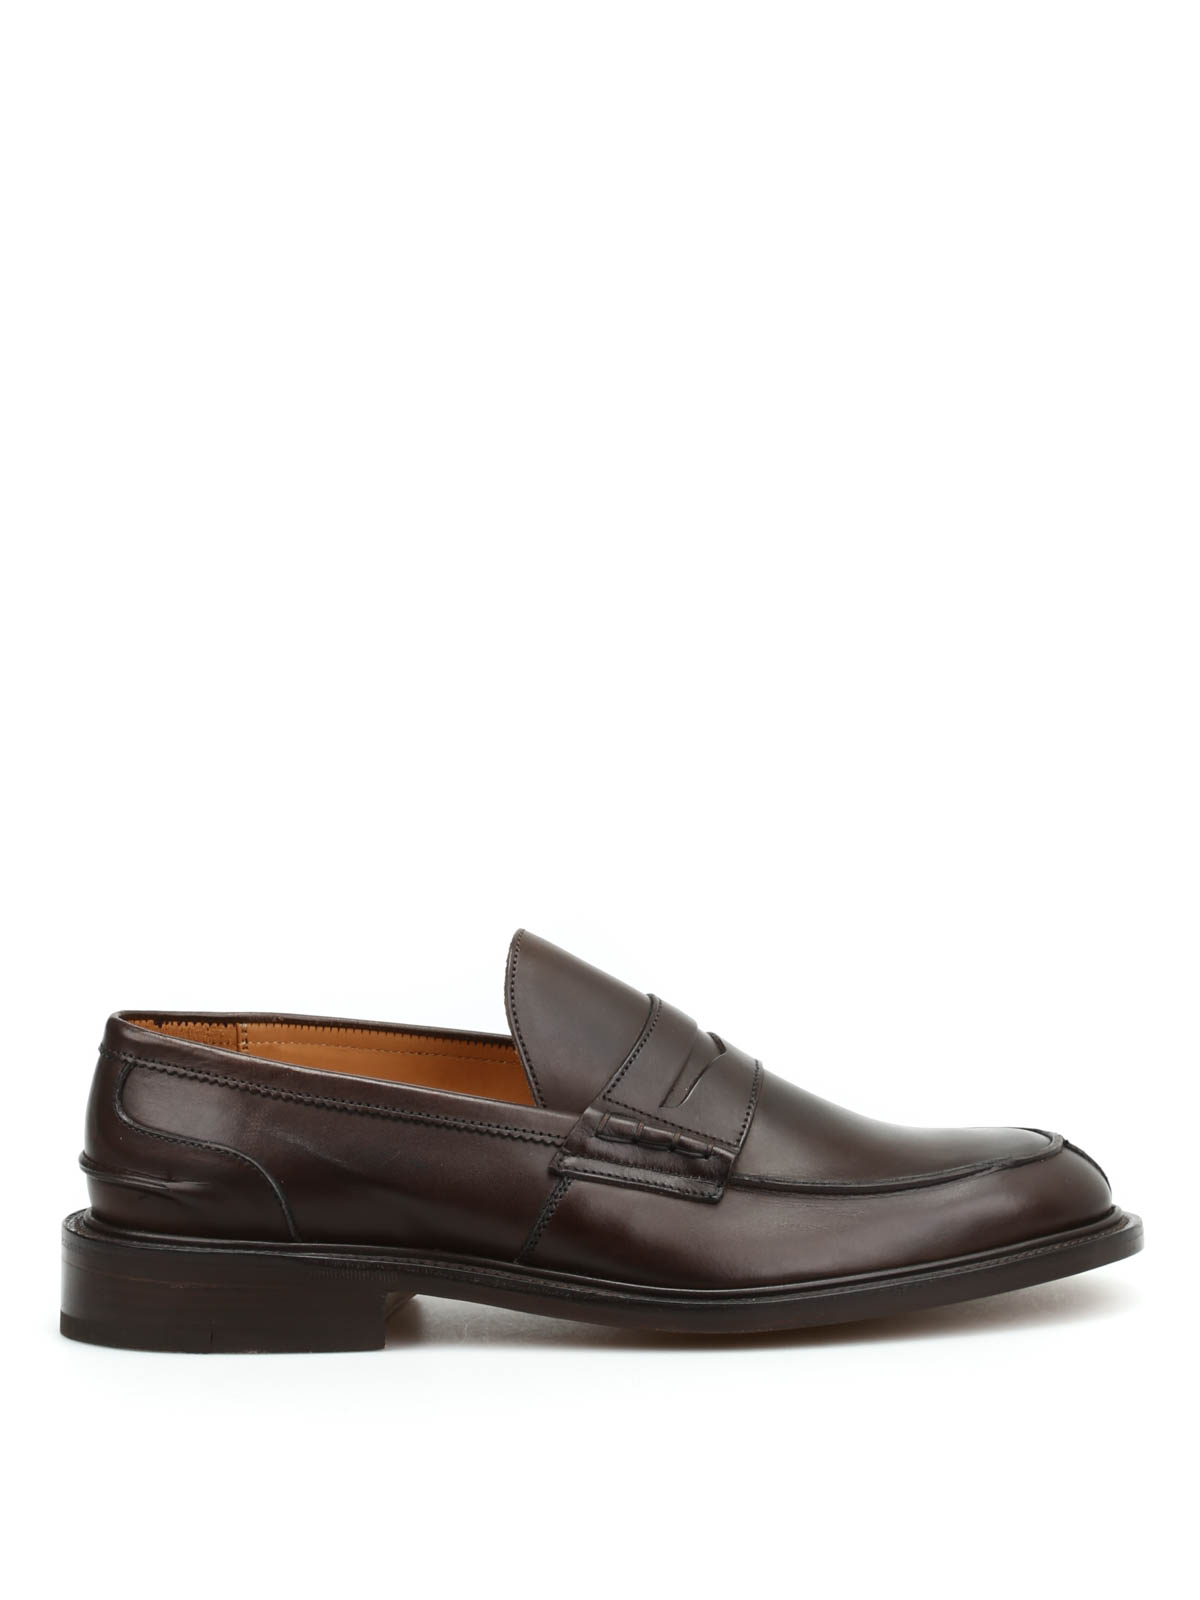 Trickers James Penny Loafer ESPRESSO BURNISHED• Michele Inzerillo ...